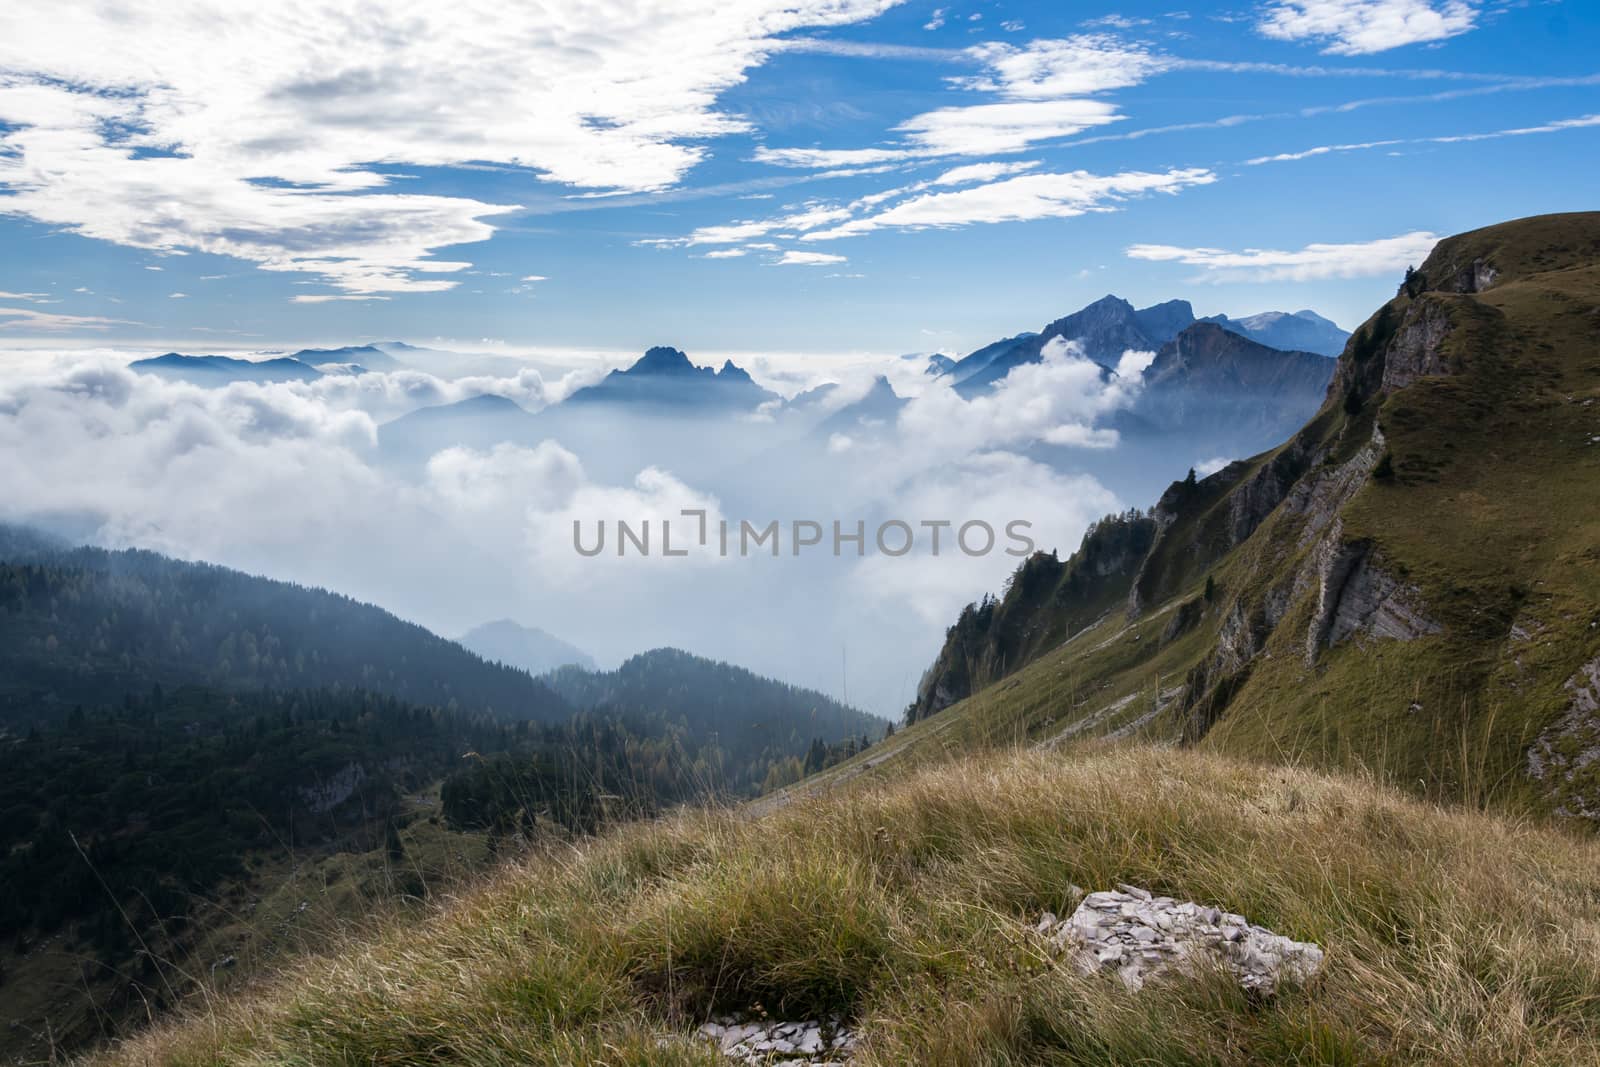 Italian dolomites during a sunny day with a sea of clouds by enrico.lapponi